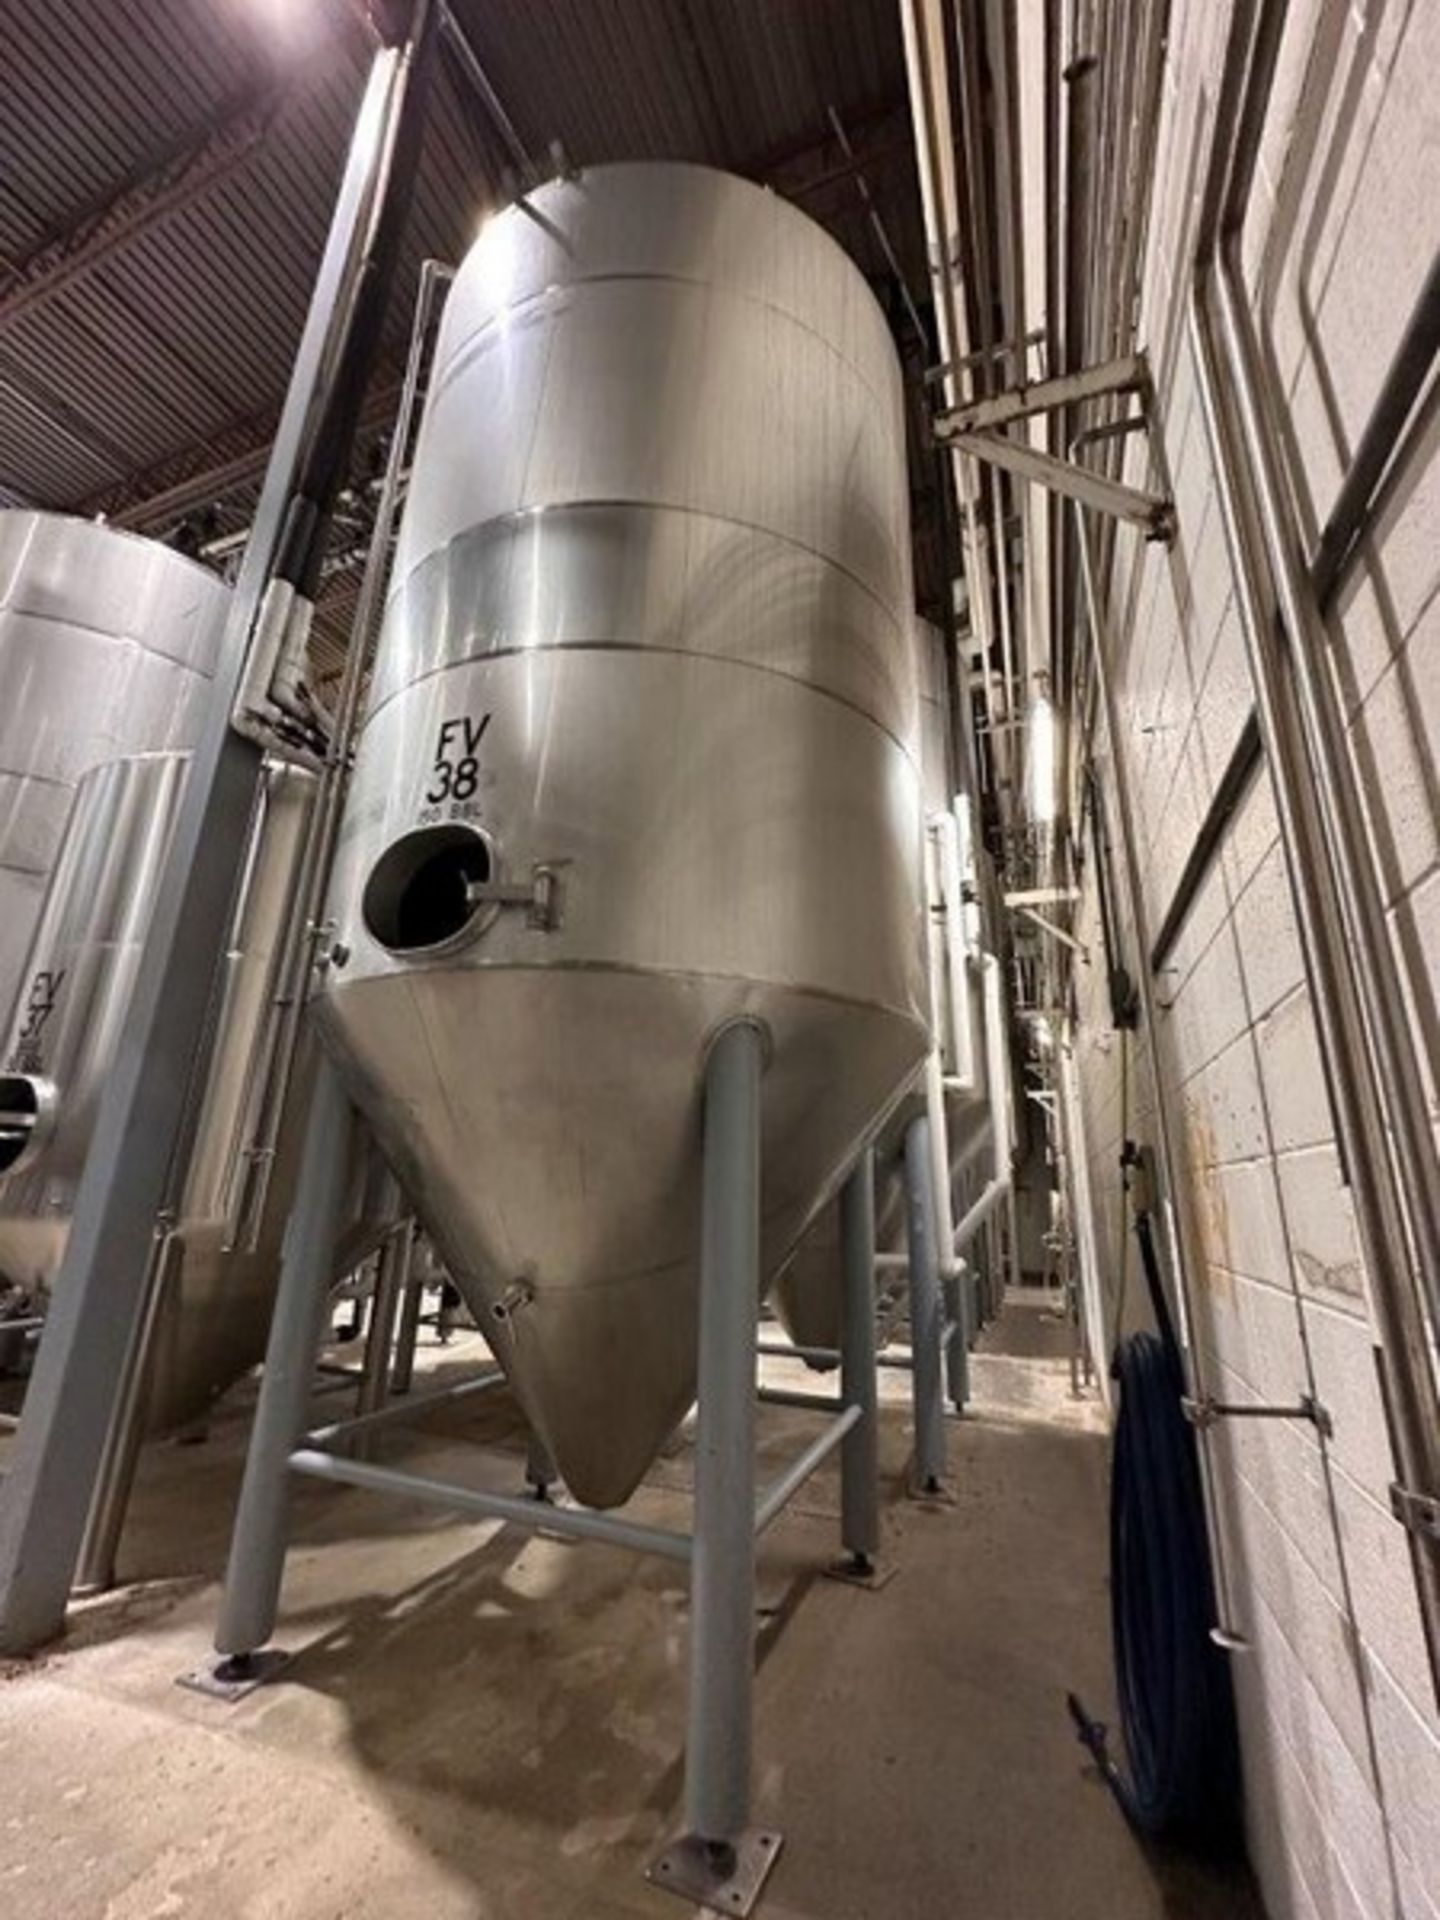 150 BBL (4650 Gallon) Vertical Cone Bottom 304 Stainless Steel Jacketed Vessel. Manufactured by Sant - Image 2 of 7